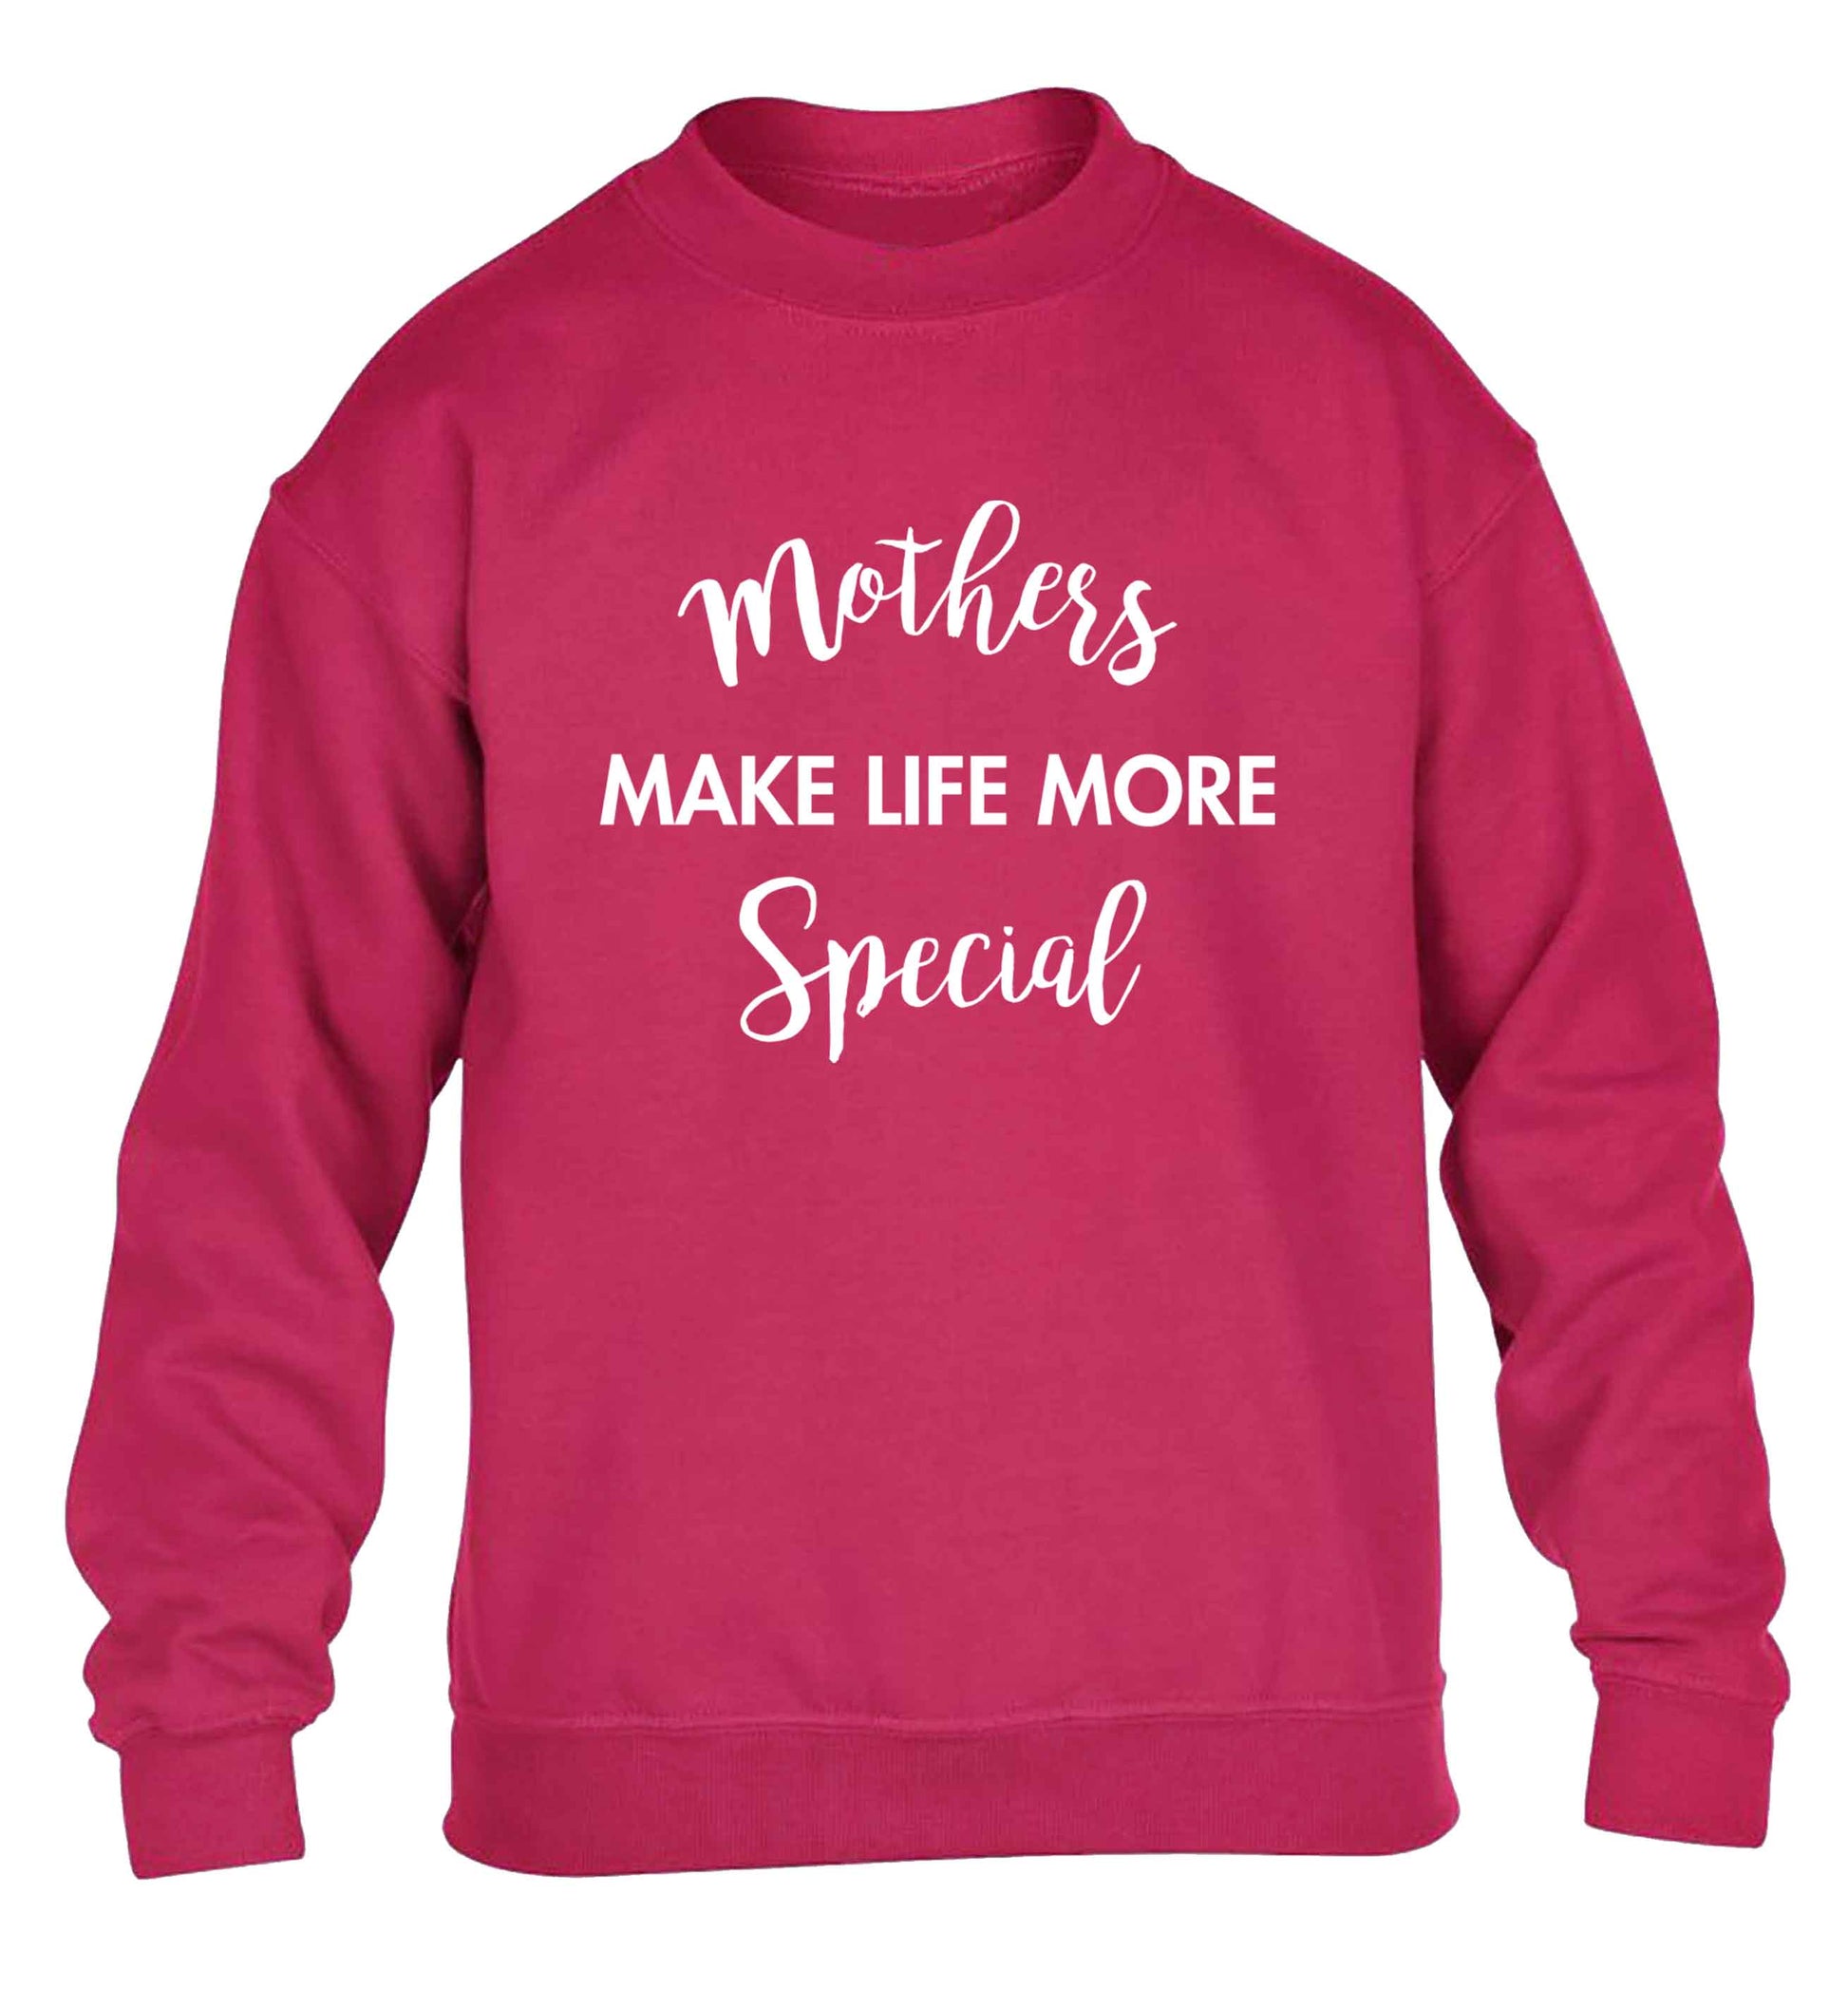 Mother's make life more special children's pink sweater 12-13 Years